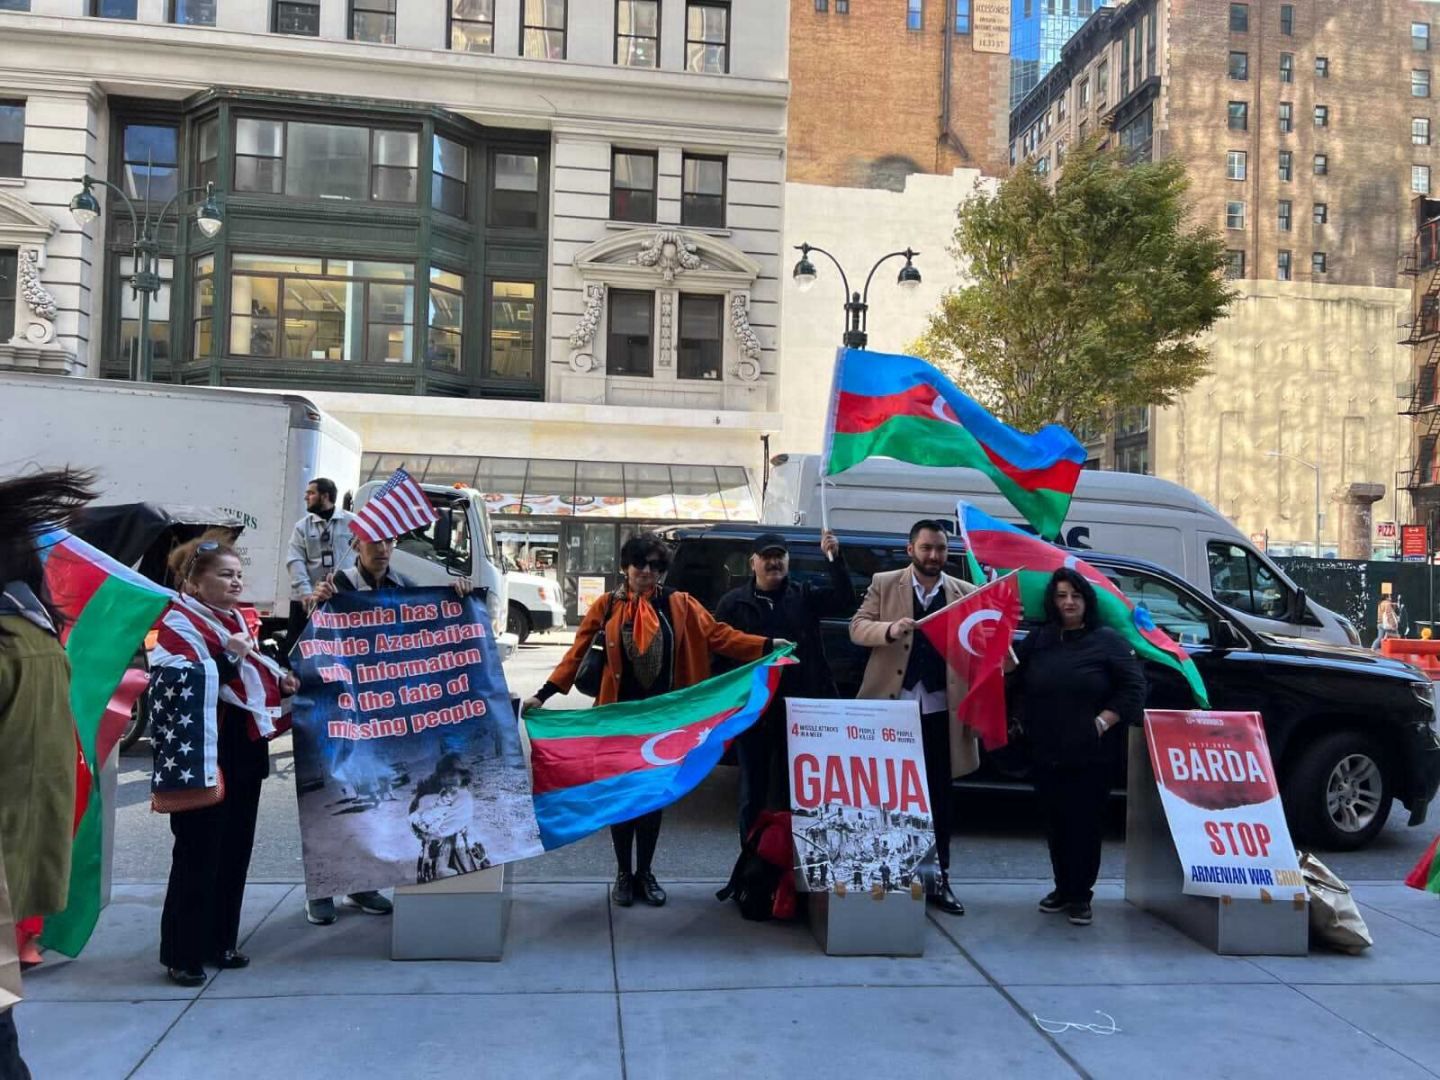 Azerbaijani community activists hold rally in front of headquarters of Human Rights Watch in New York [PHOTO]